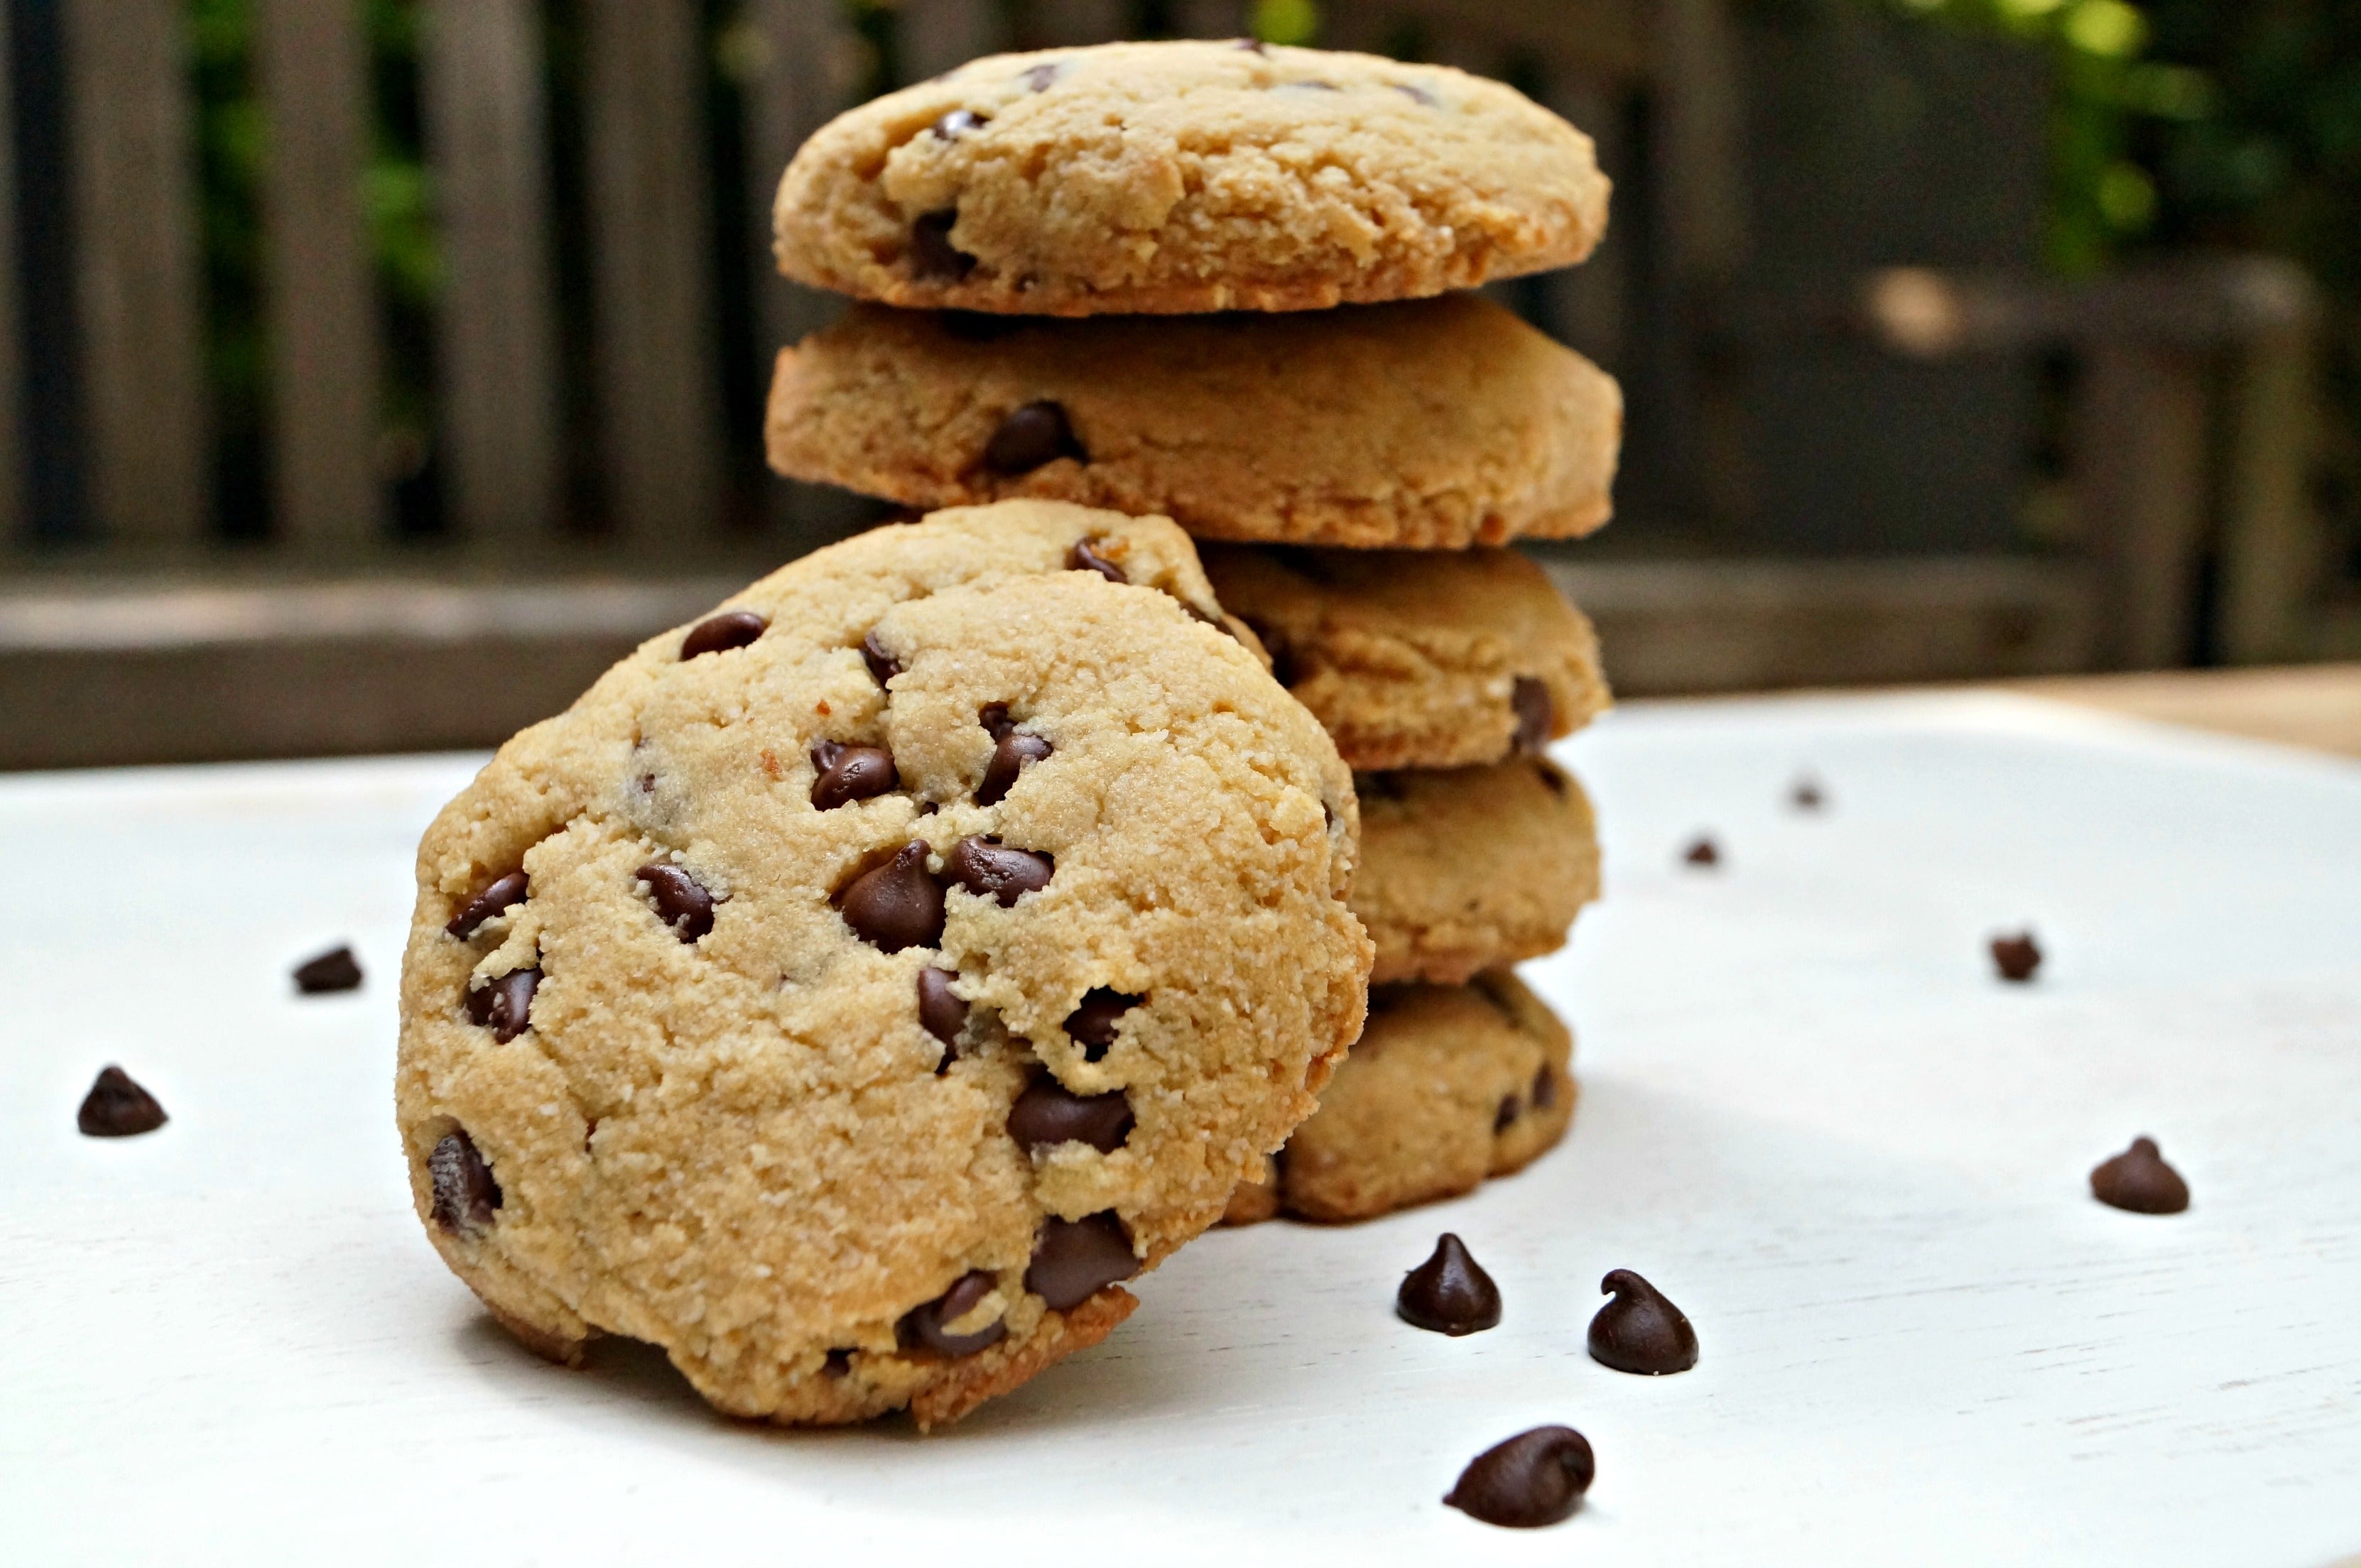  The Scoop  :: Introducing Soft-baked Chocolate Chip Cookies